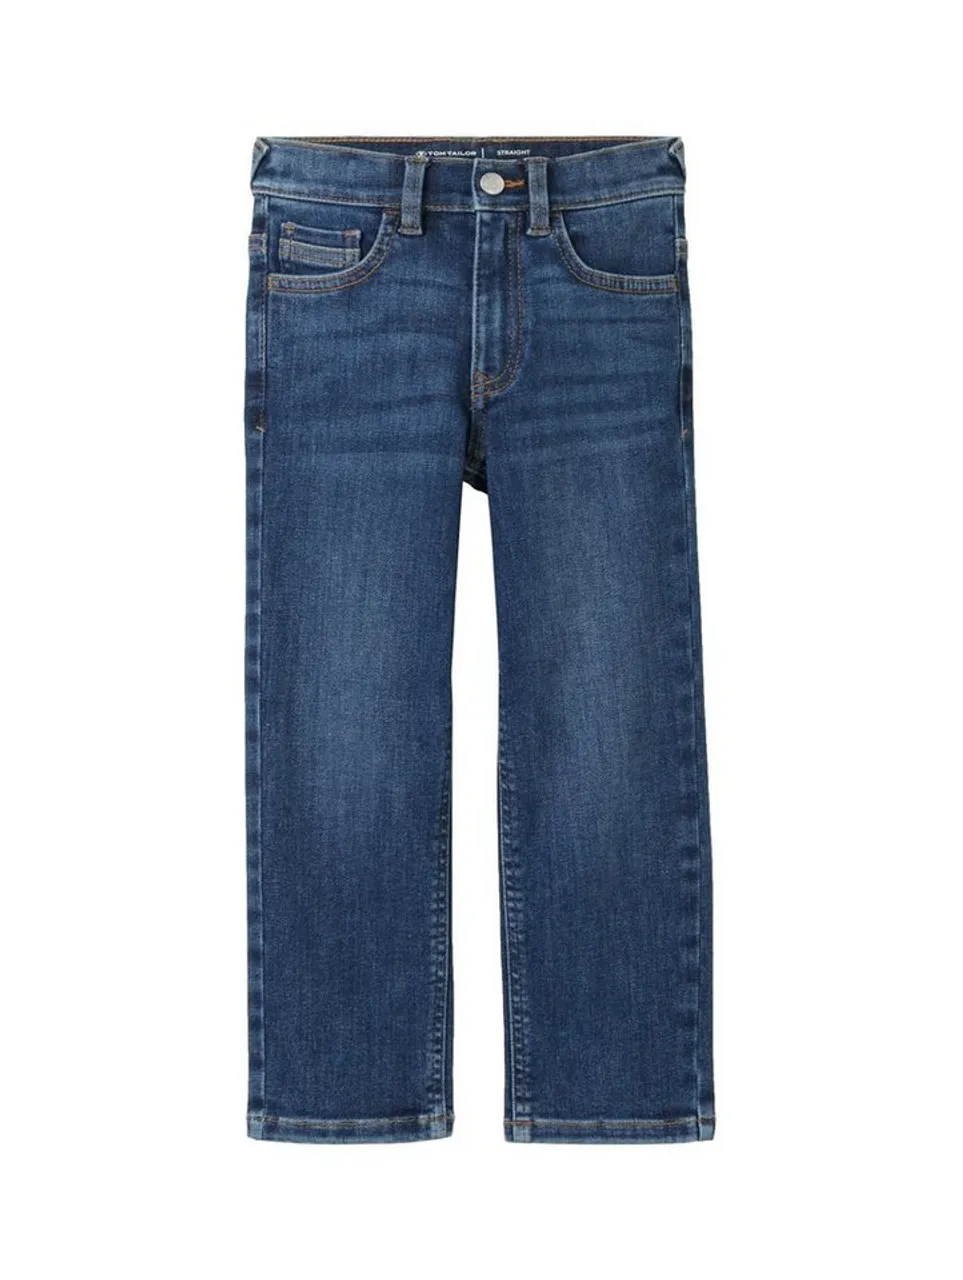 TOM TAILOR Straight-Jeans im Five-Pocket-Style